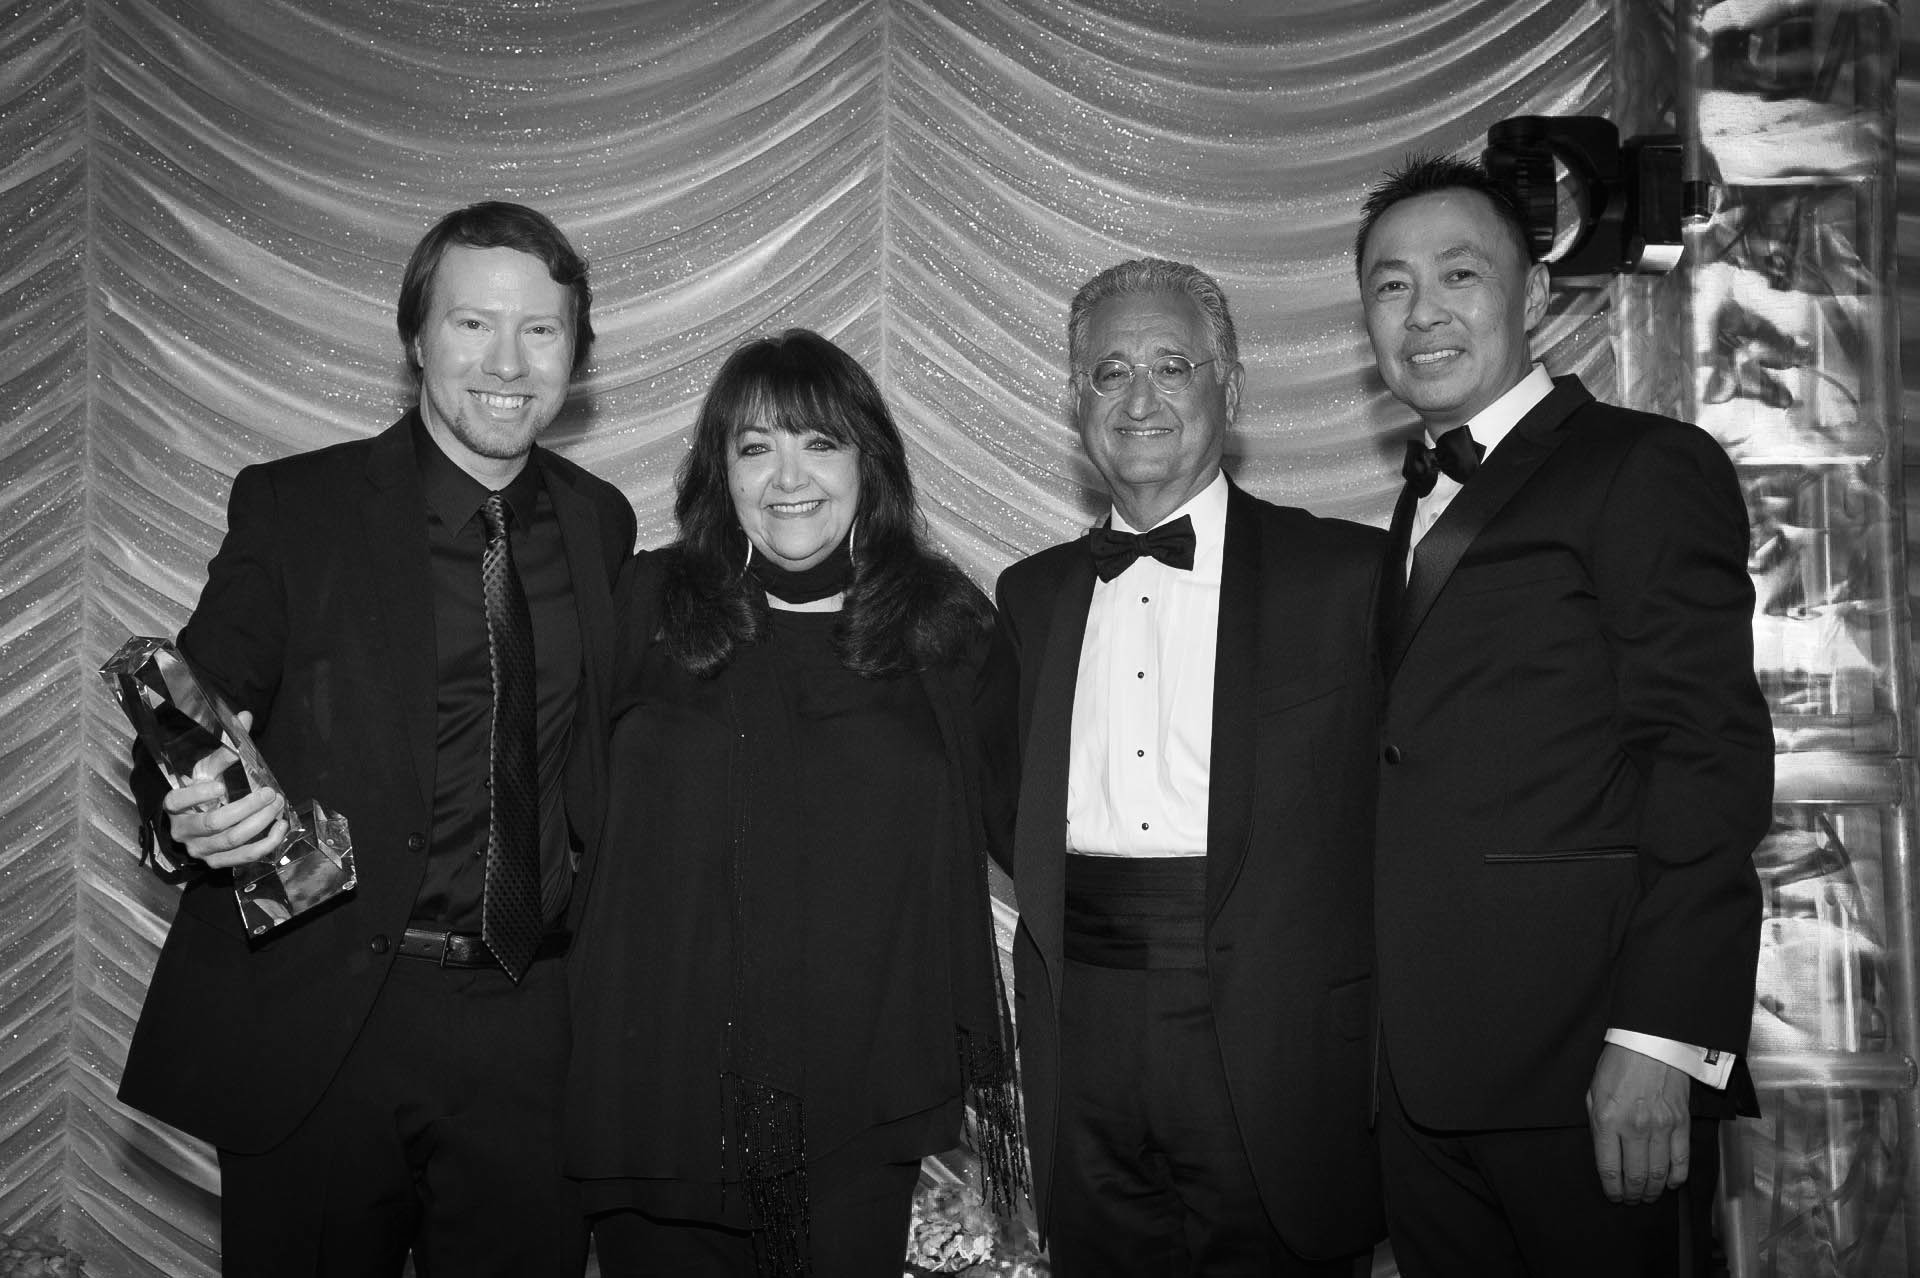 Left to Right: composer Bill Brown, Doreen Ringer Ross, Del Bryant, and Ray Yee.